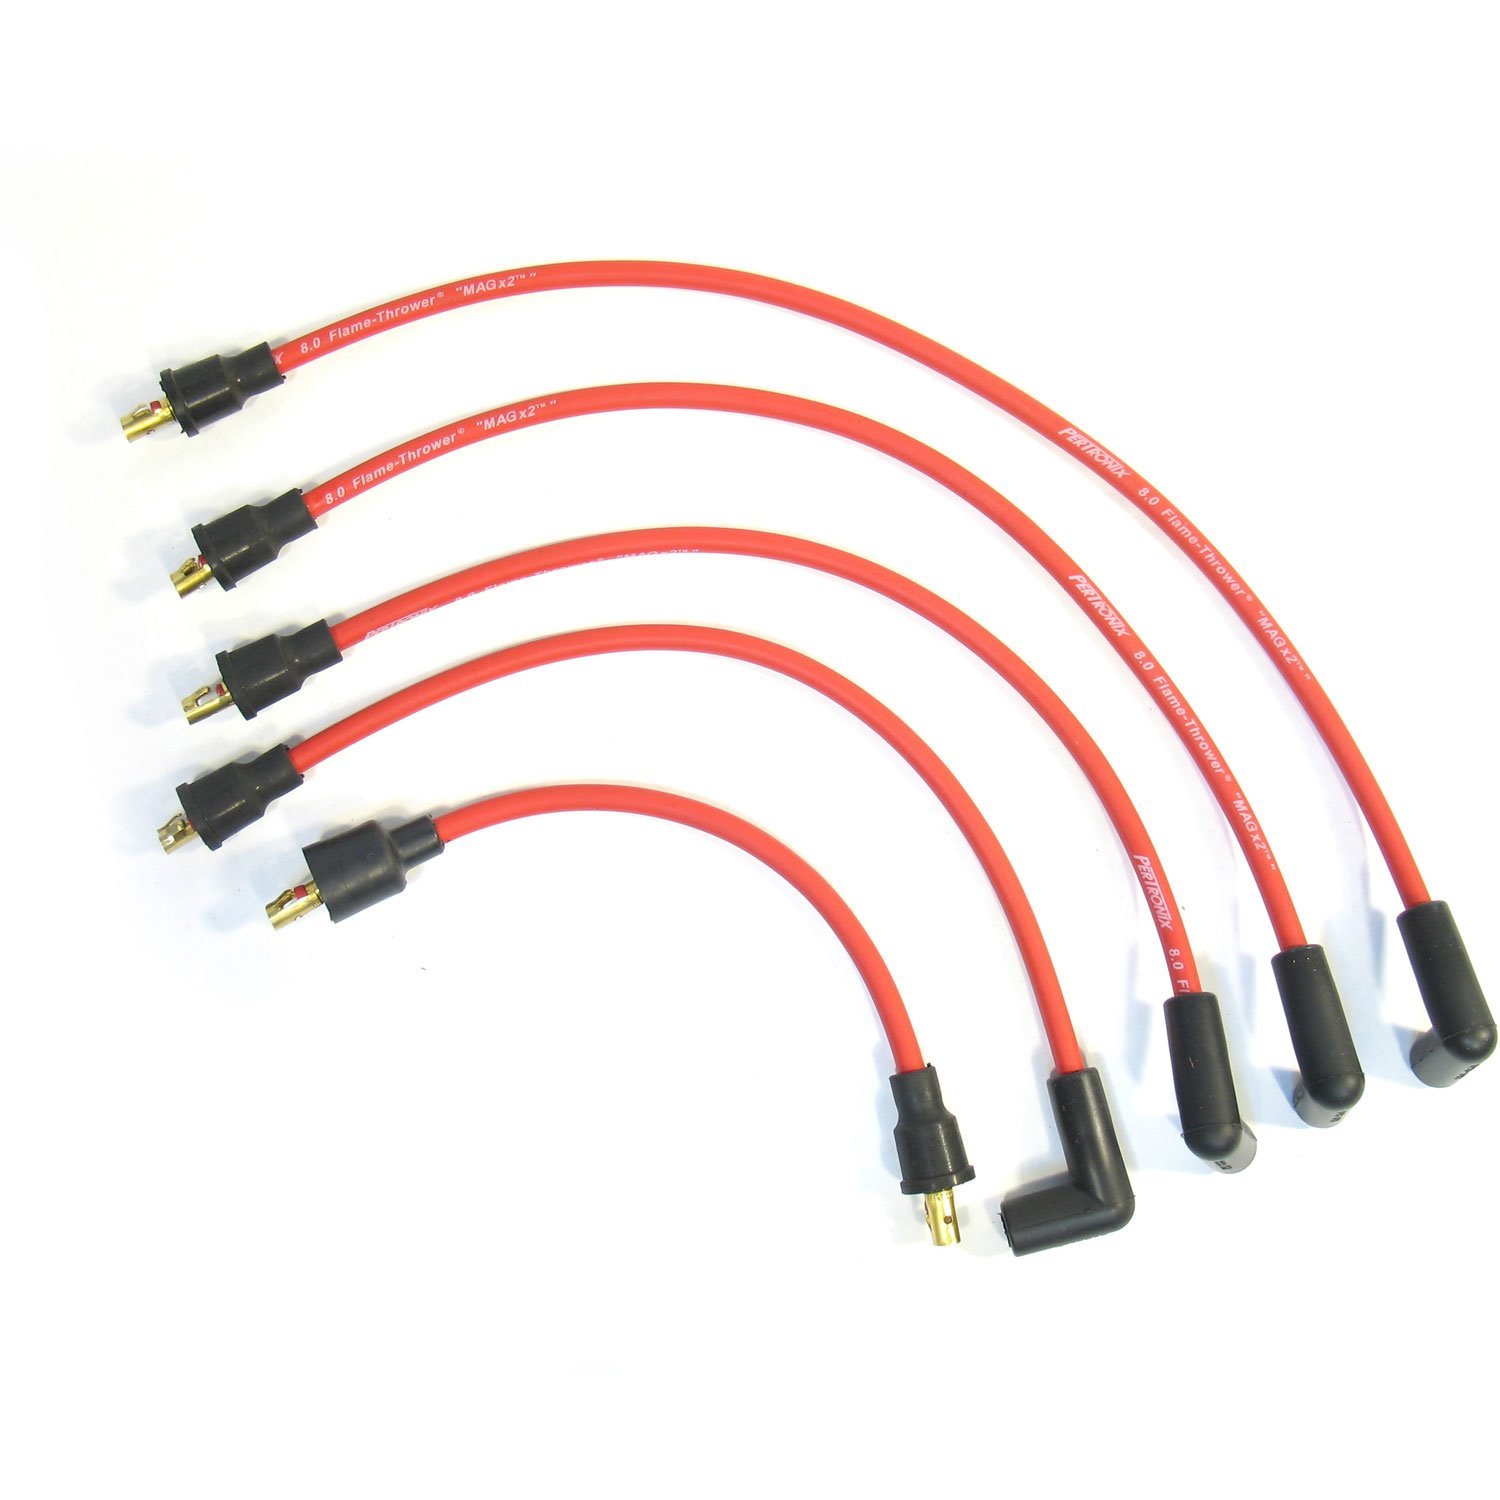 PerTronix 804412 Flame-Thrower Spark Plug Wires 4 cyl 8mm Austin/MG Red